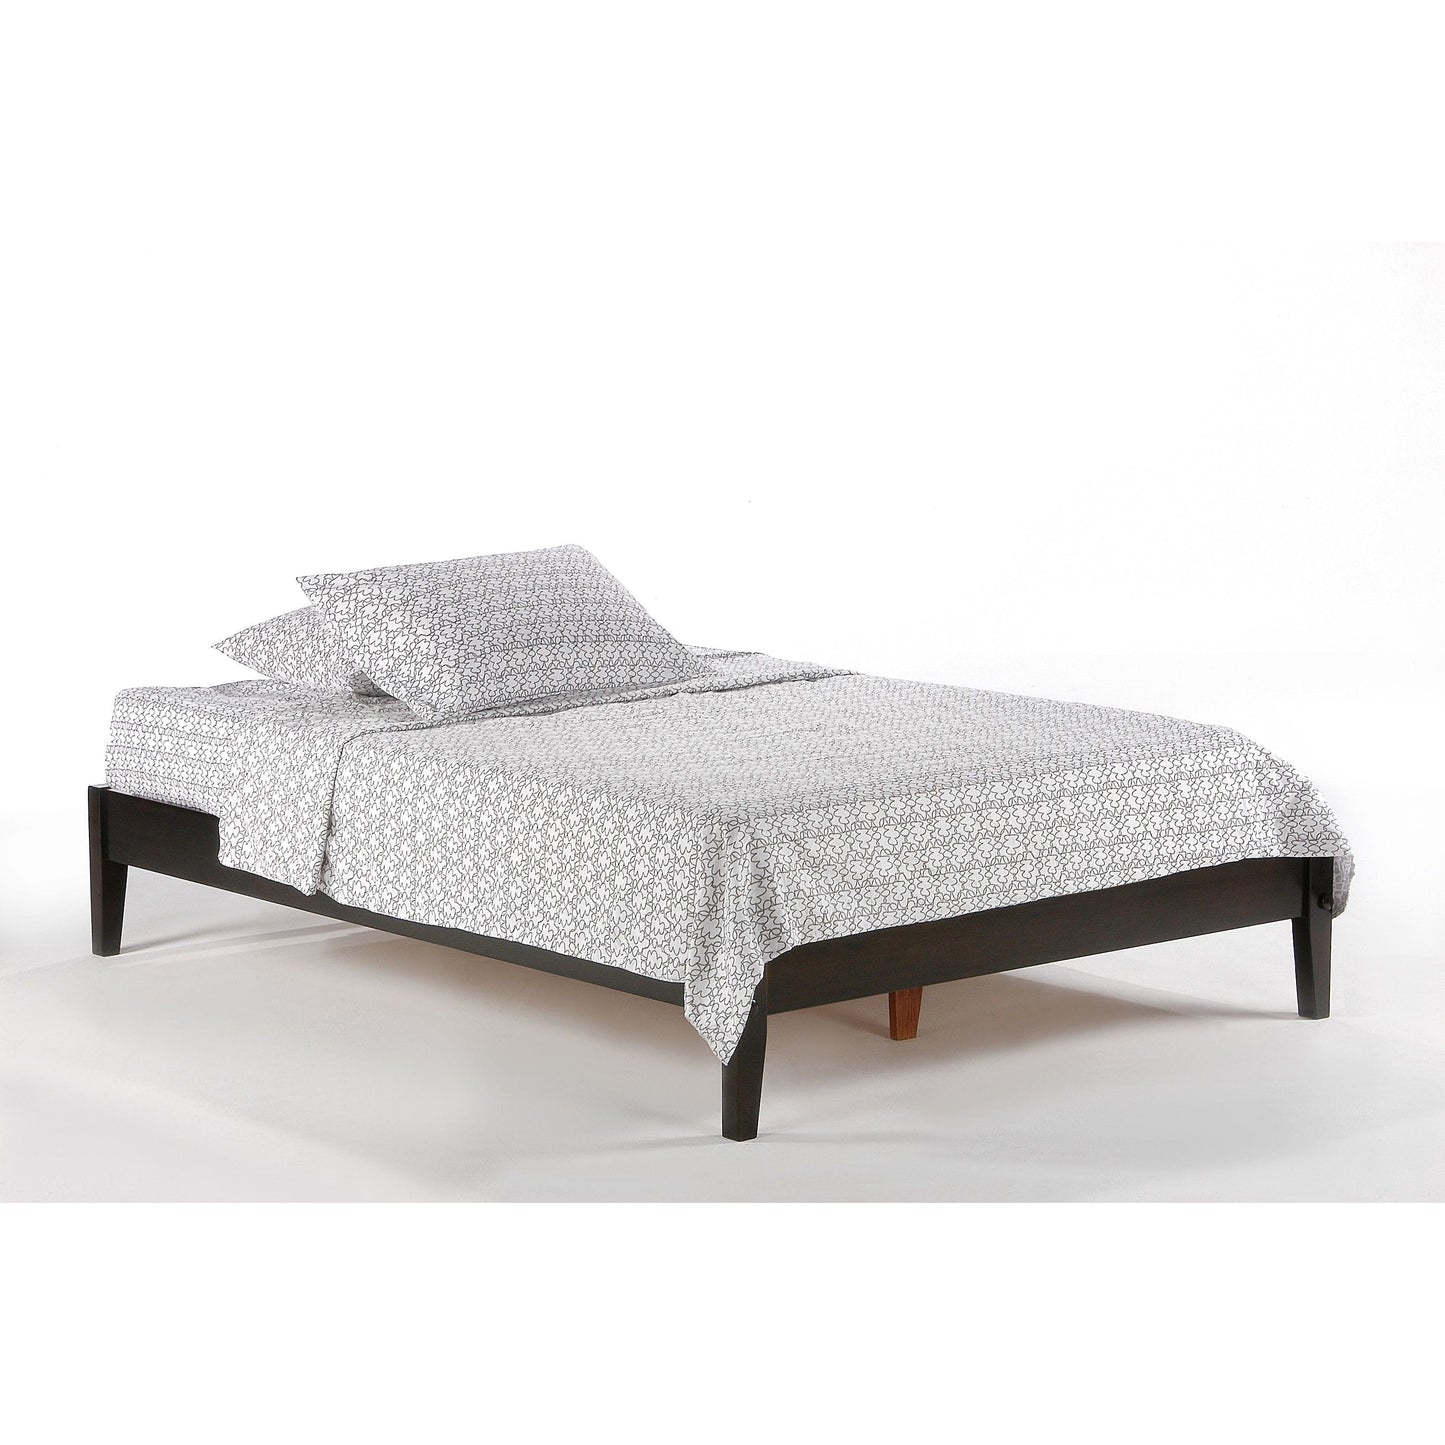 Night And Day Basic Full Platform Bed in cherry finish (P Series) BAS-FUL-COM-P-CH